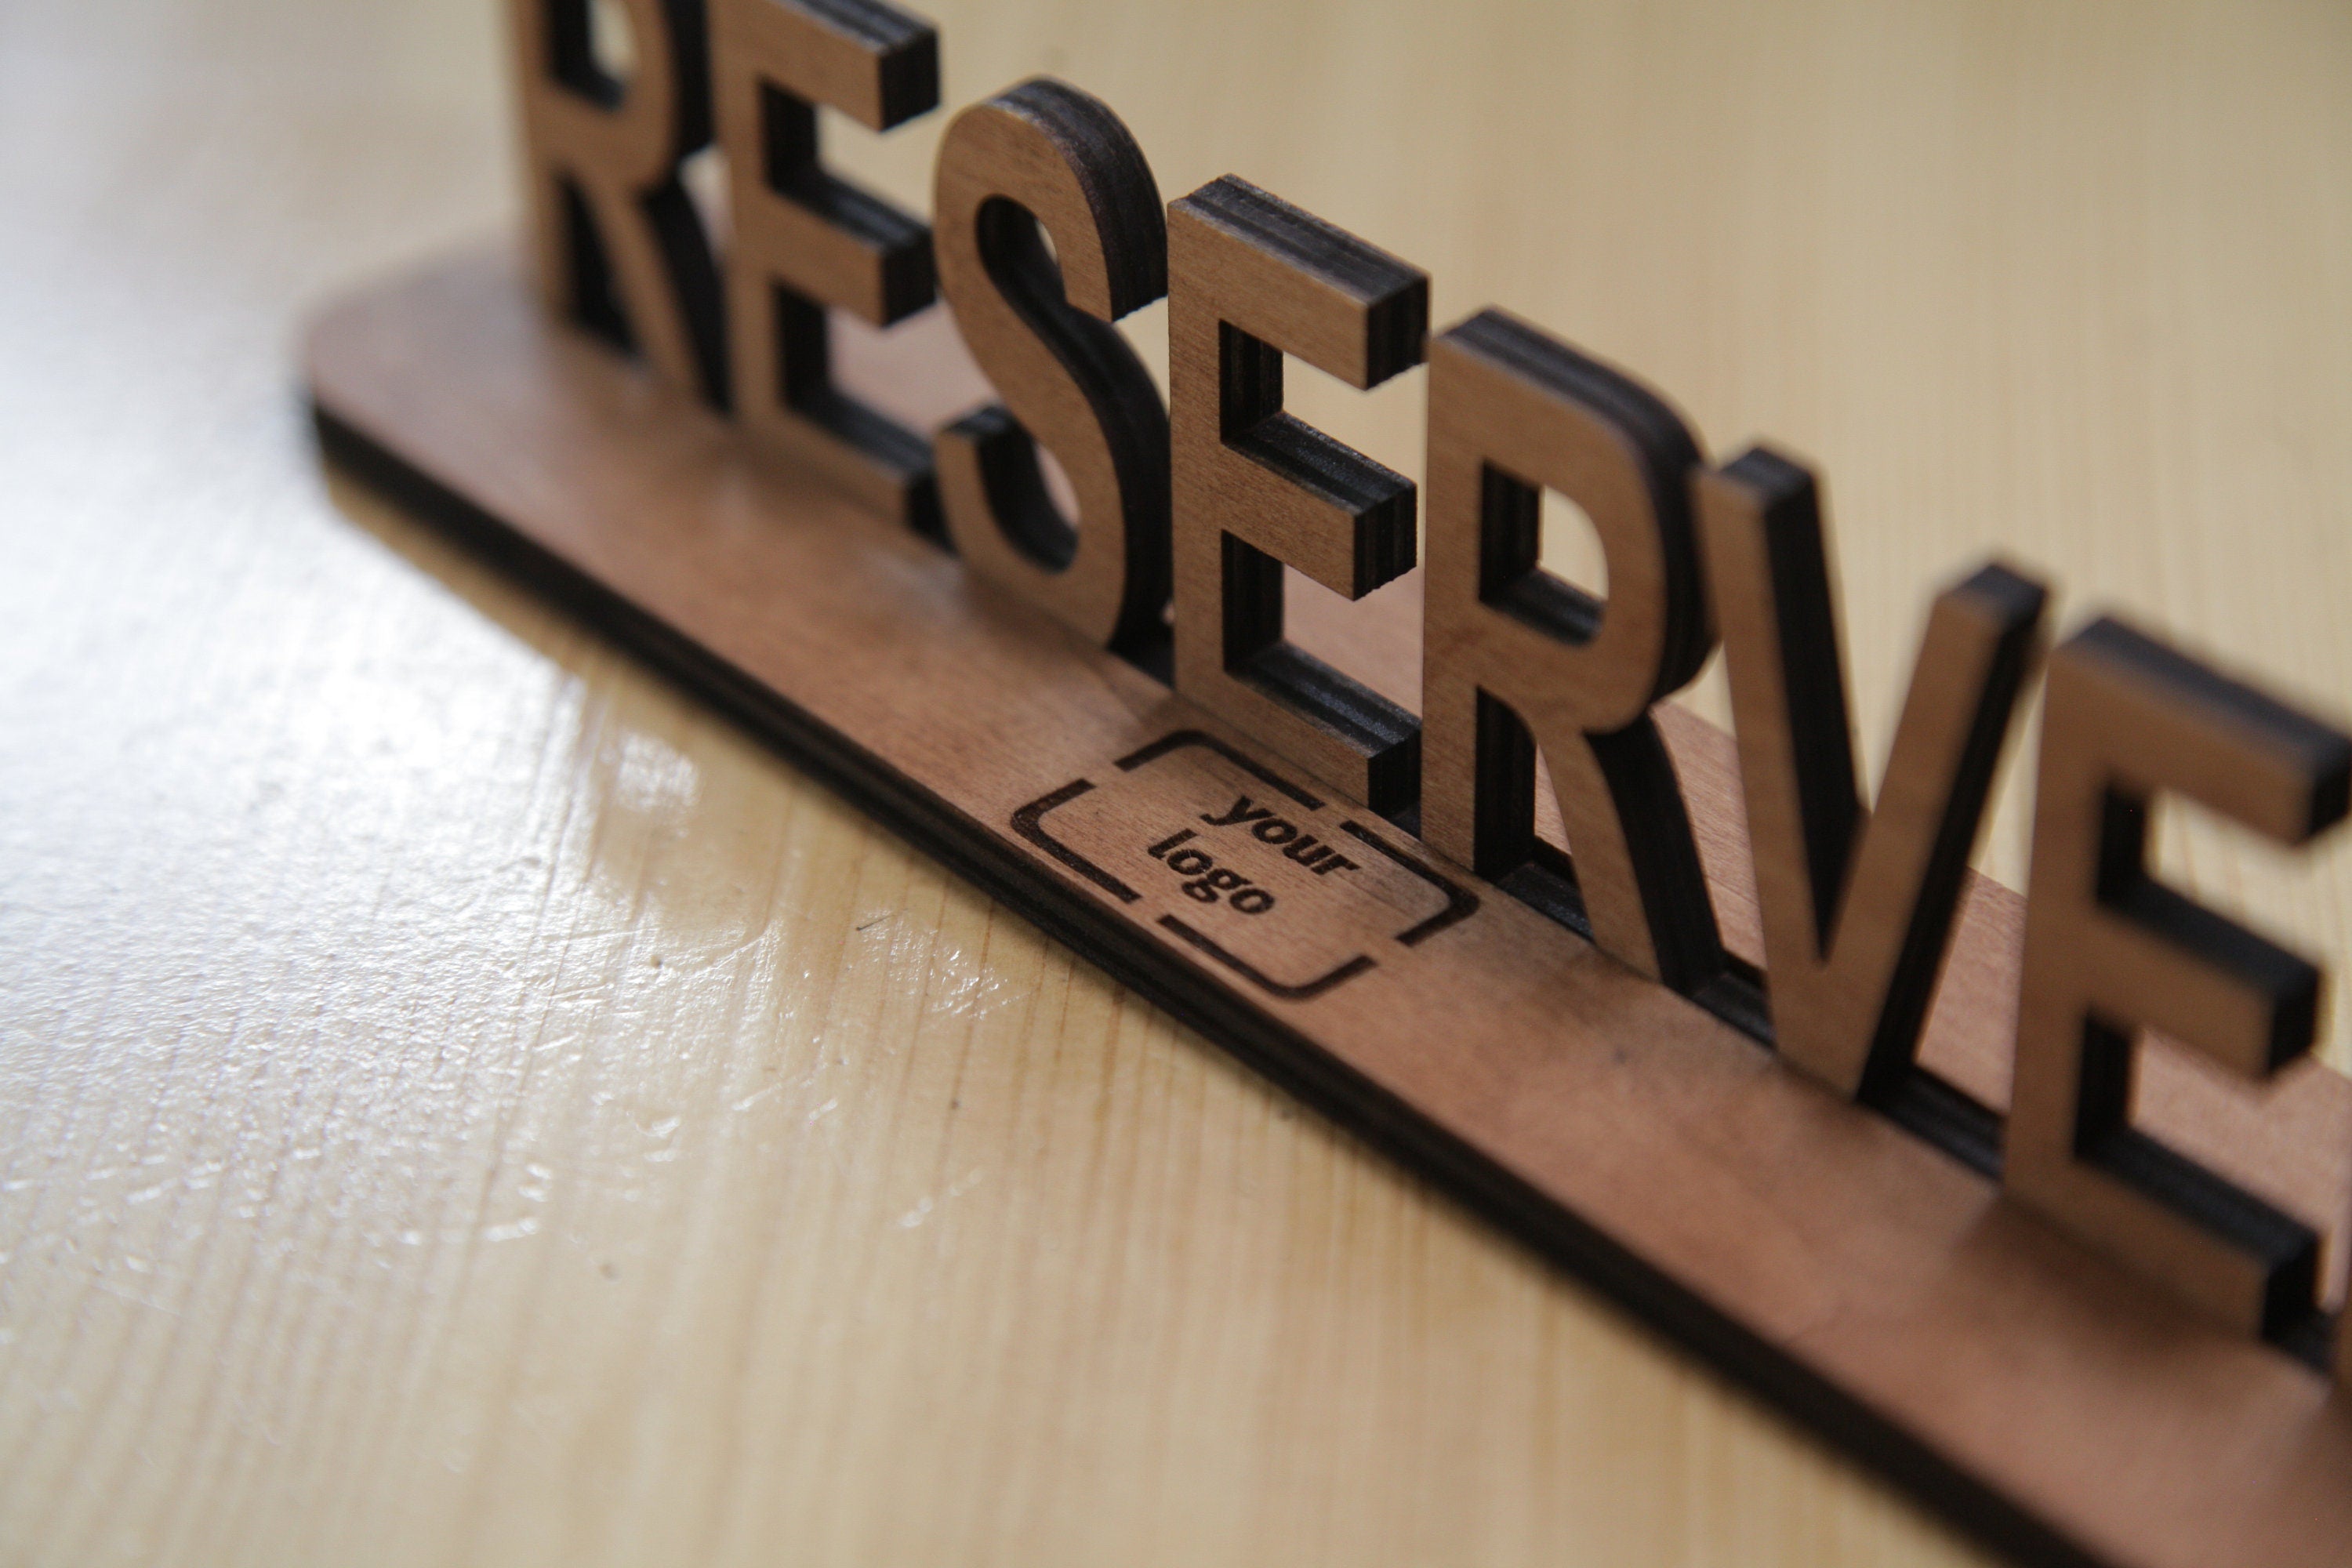 Reserved Table Sign, Wooden Rustic Board, Restaurant Decor, Wood Reserved Sign